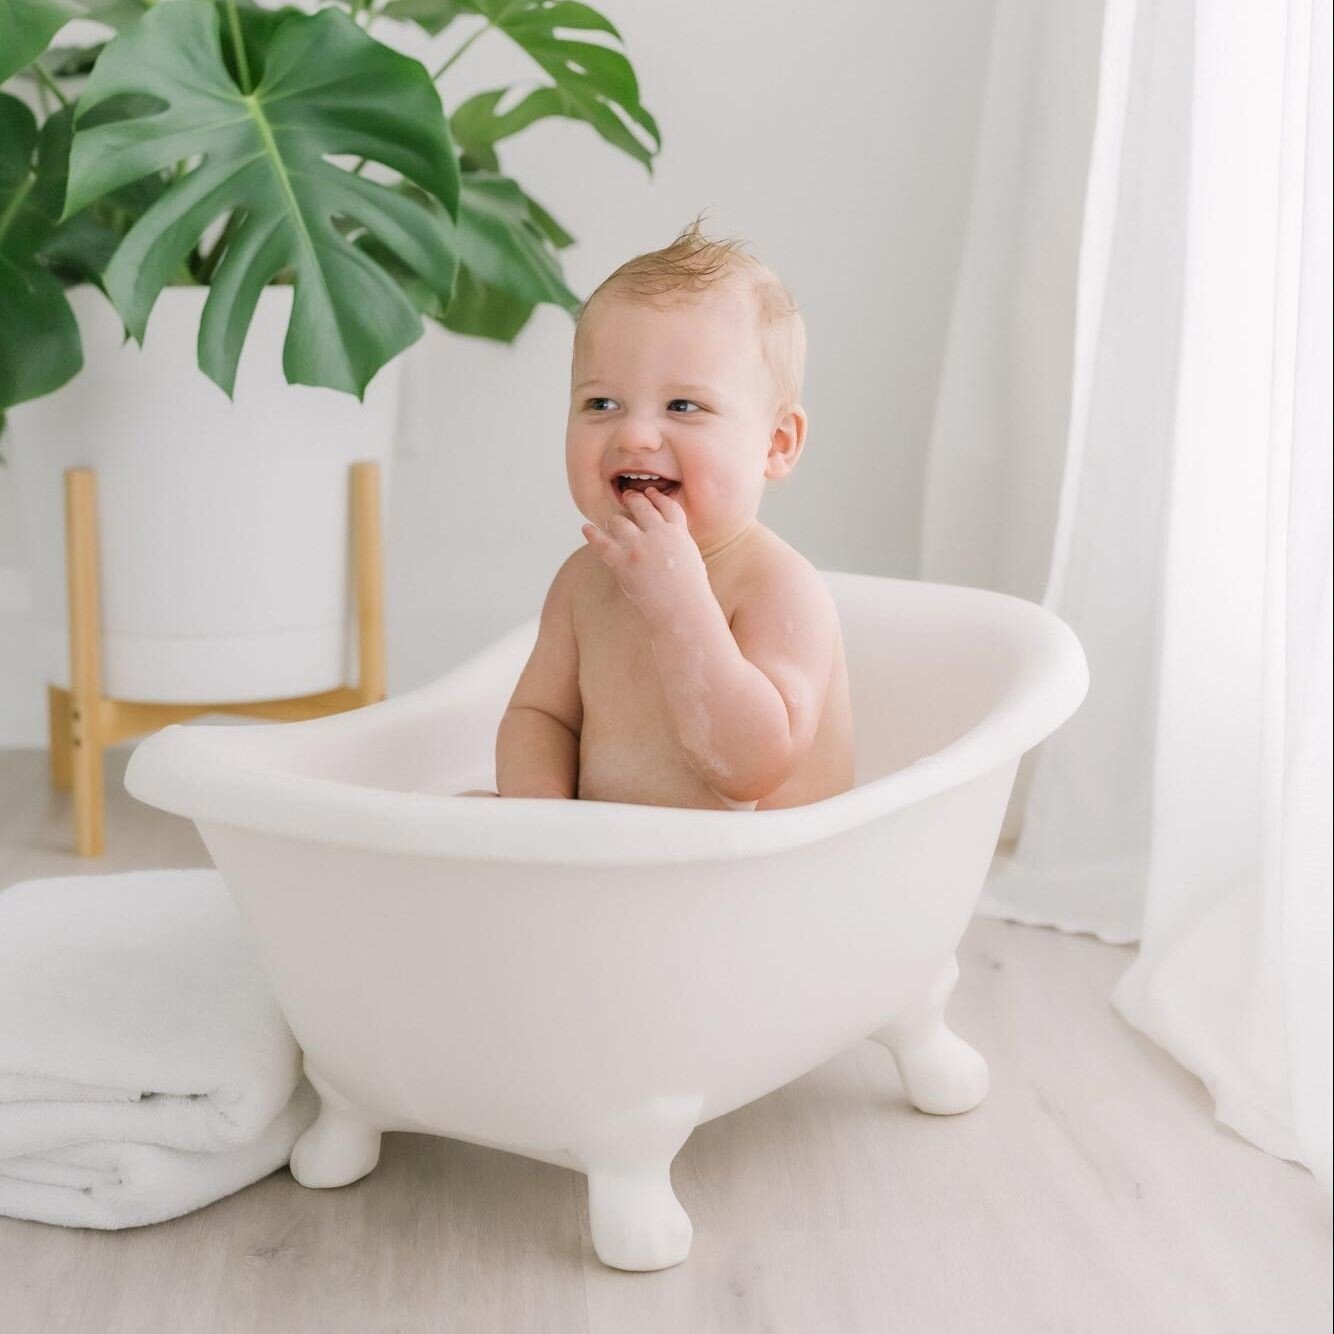 Bath Time 101: A How-To⁠
⁠
When my kids were little, they used to run up to me after bath time in their little PJs and say &quot;smell me!&quot; I would sniff their hair over an over like a 🐻 bear or something, and they'd laugh so hard. Ahhh, I miss